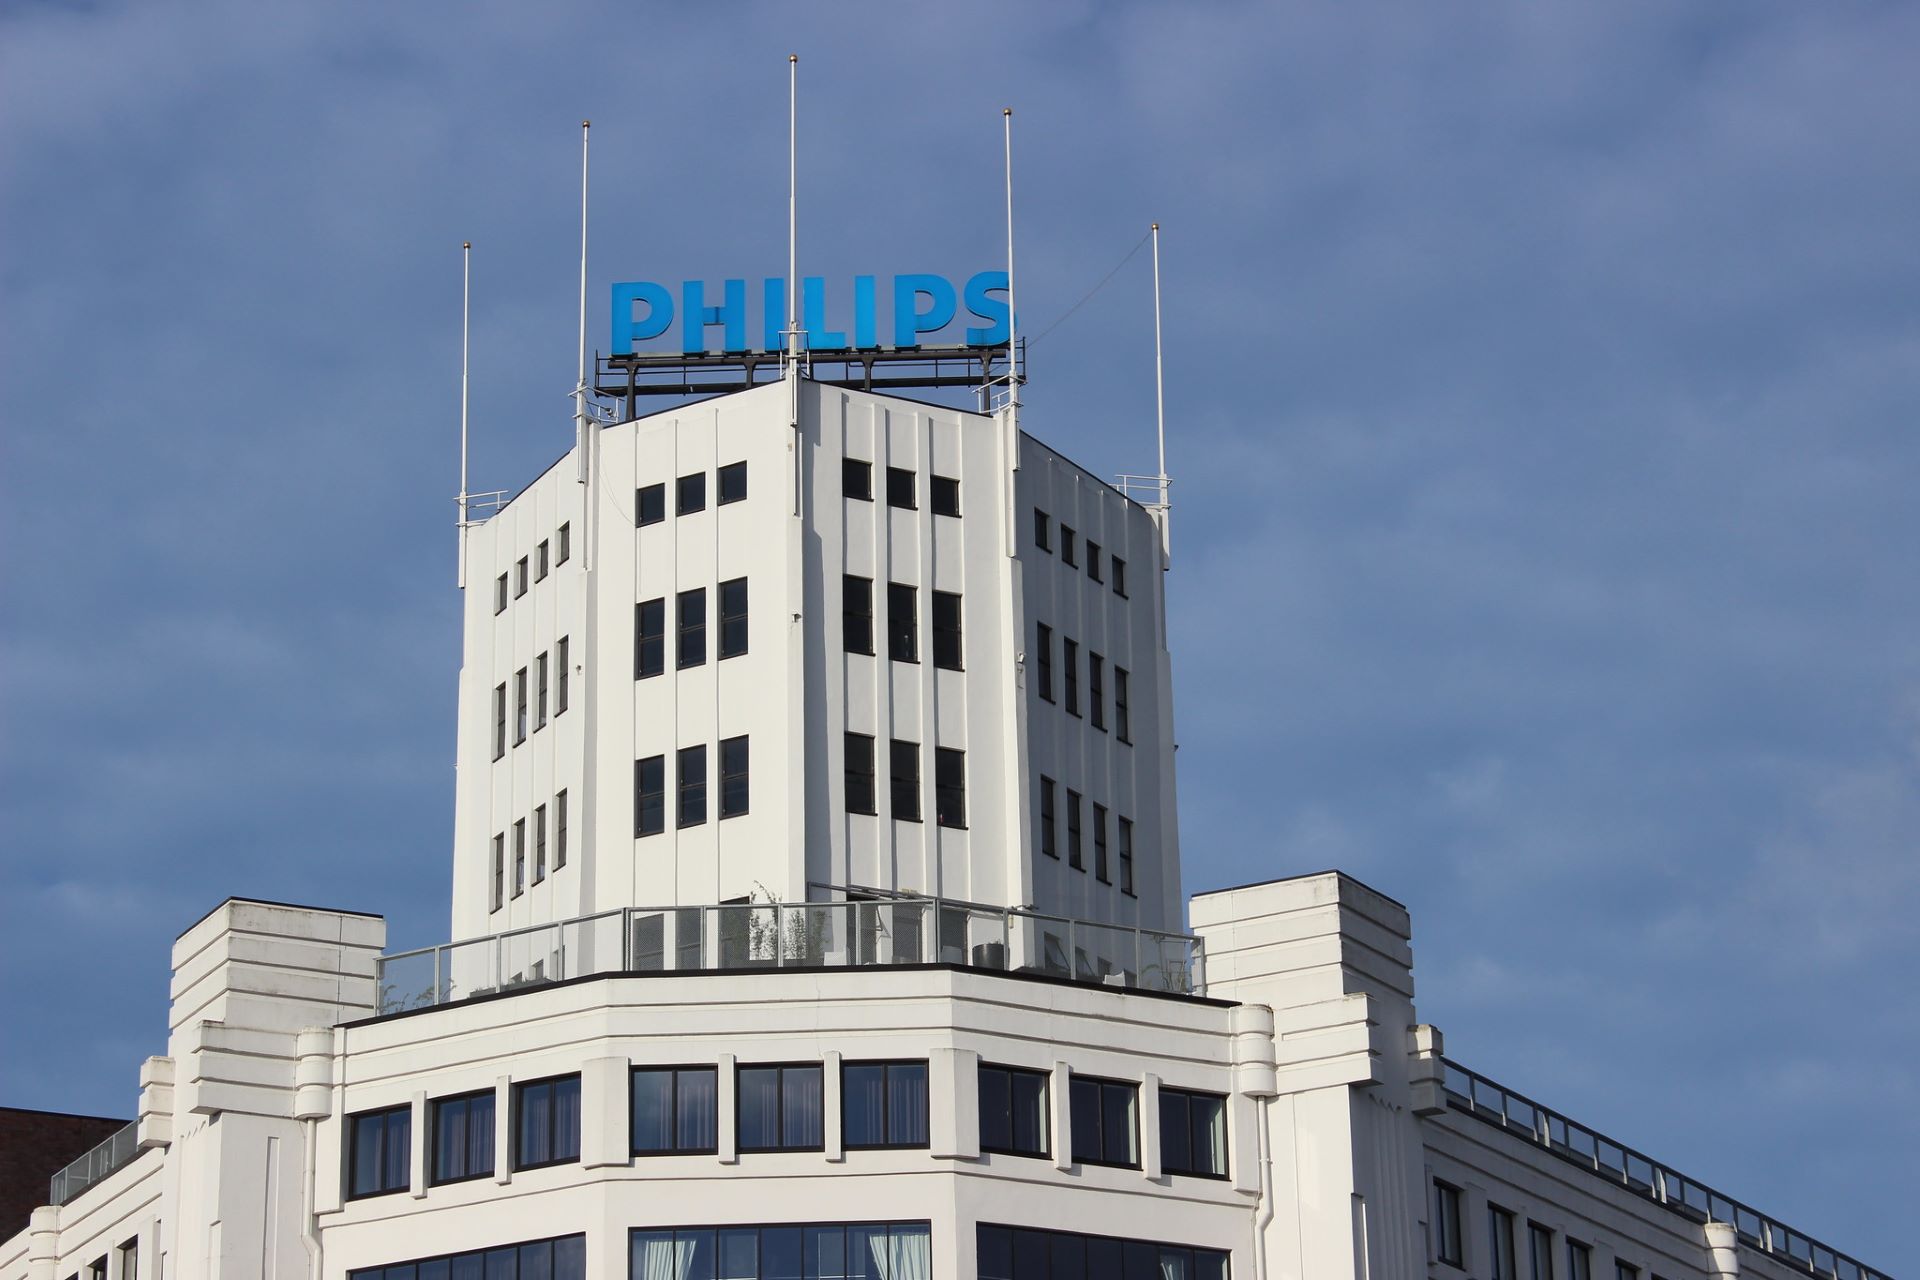 Philips says tests on recalled products show limited health risks